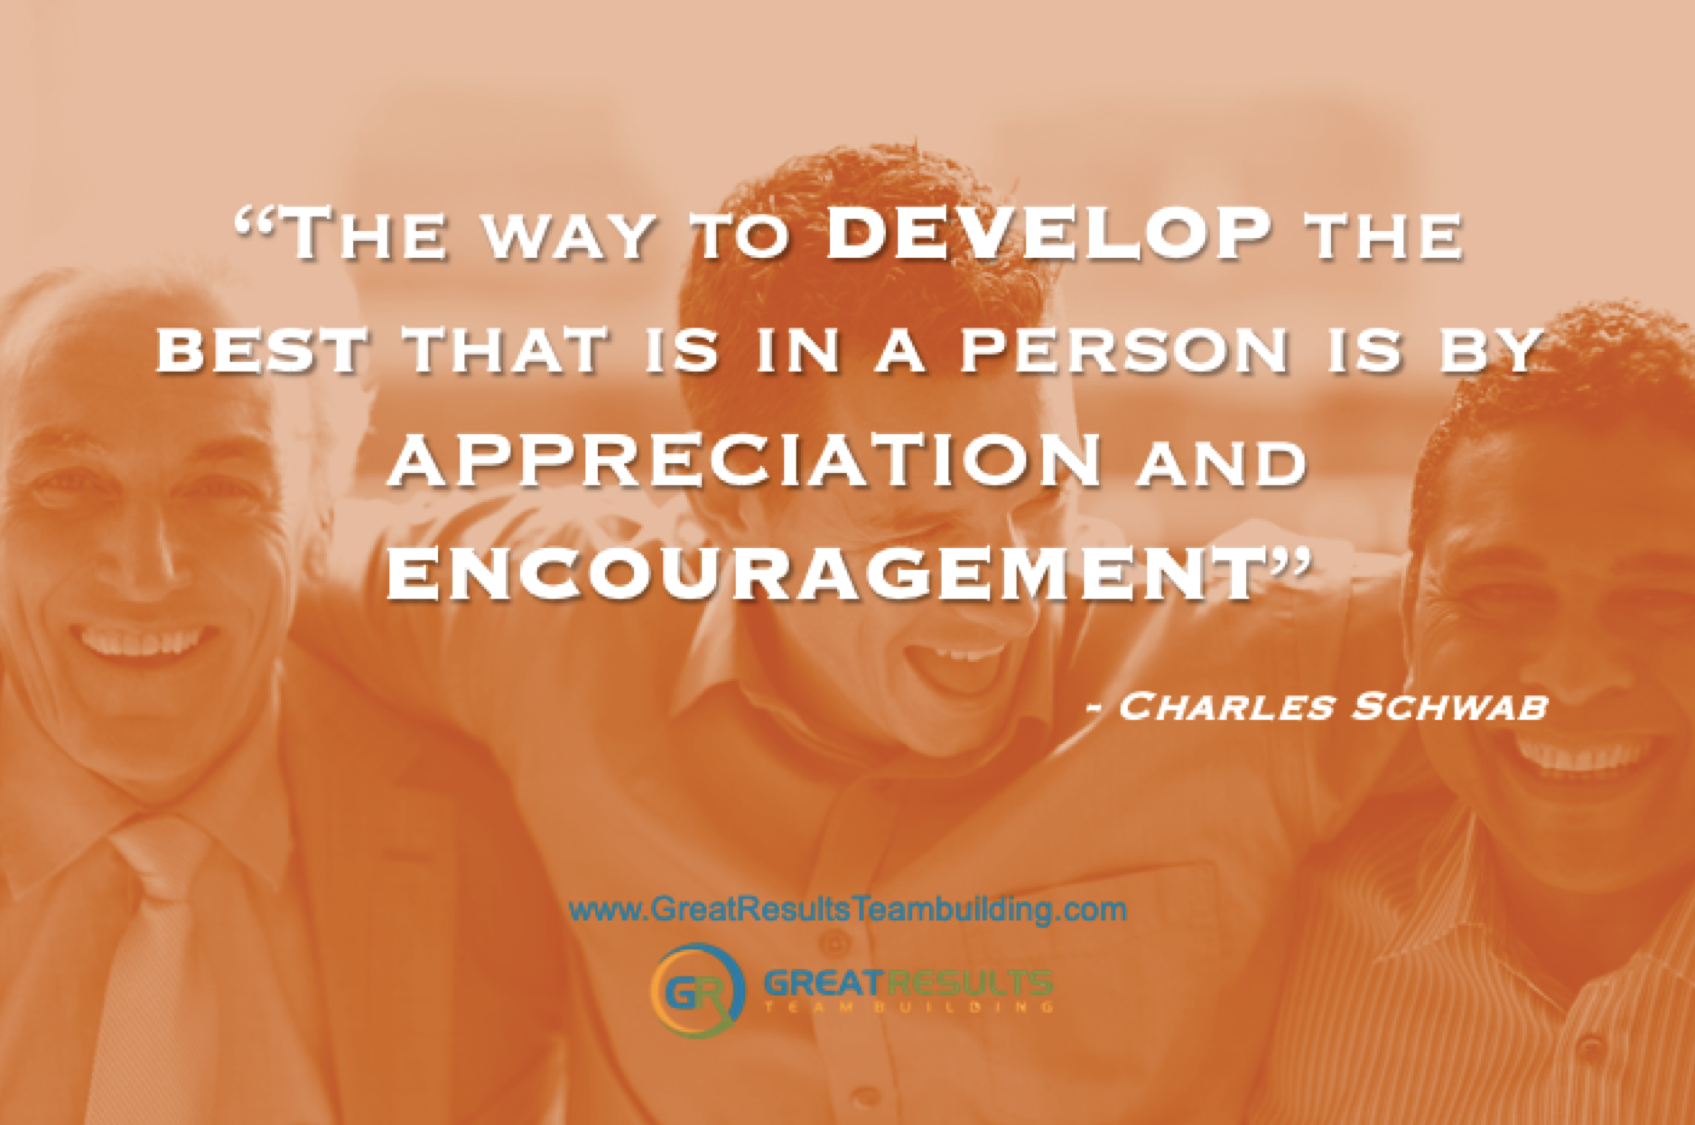 the way to develop the best that is in a person is by appreciation and encouragement. charles schwab